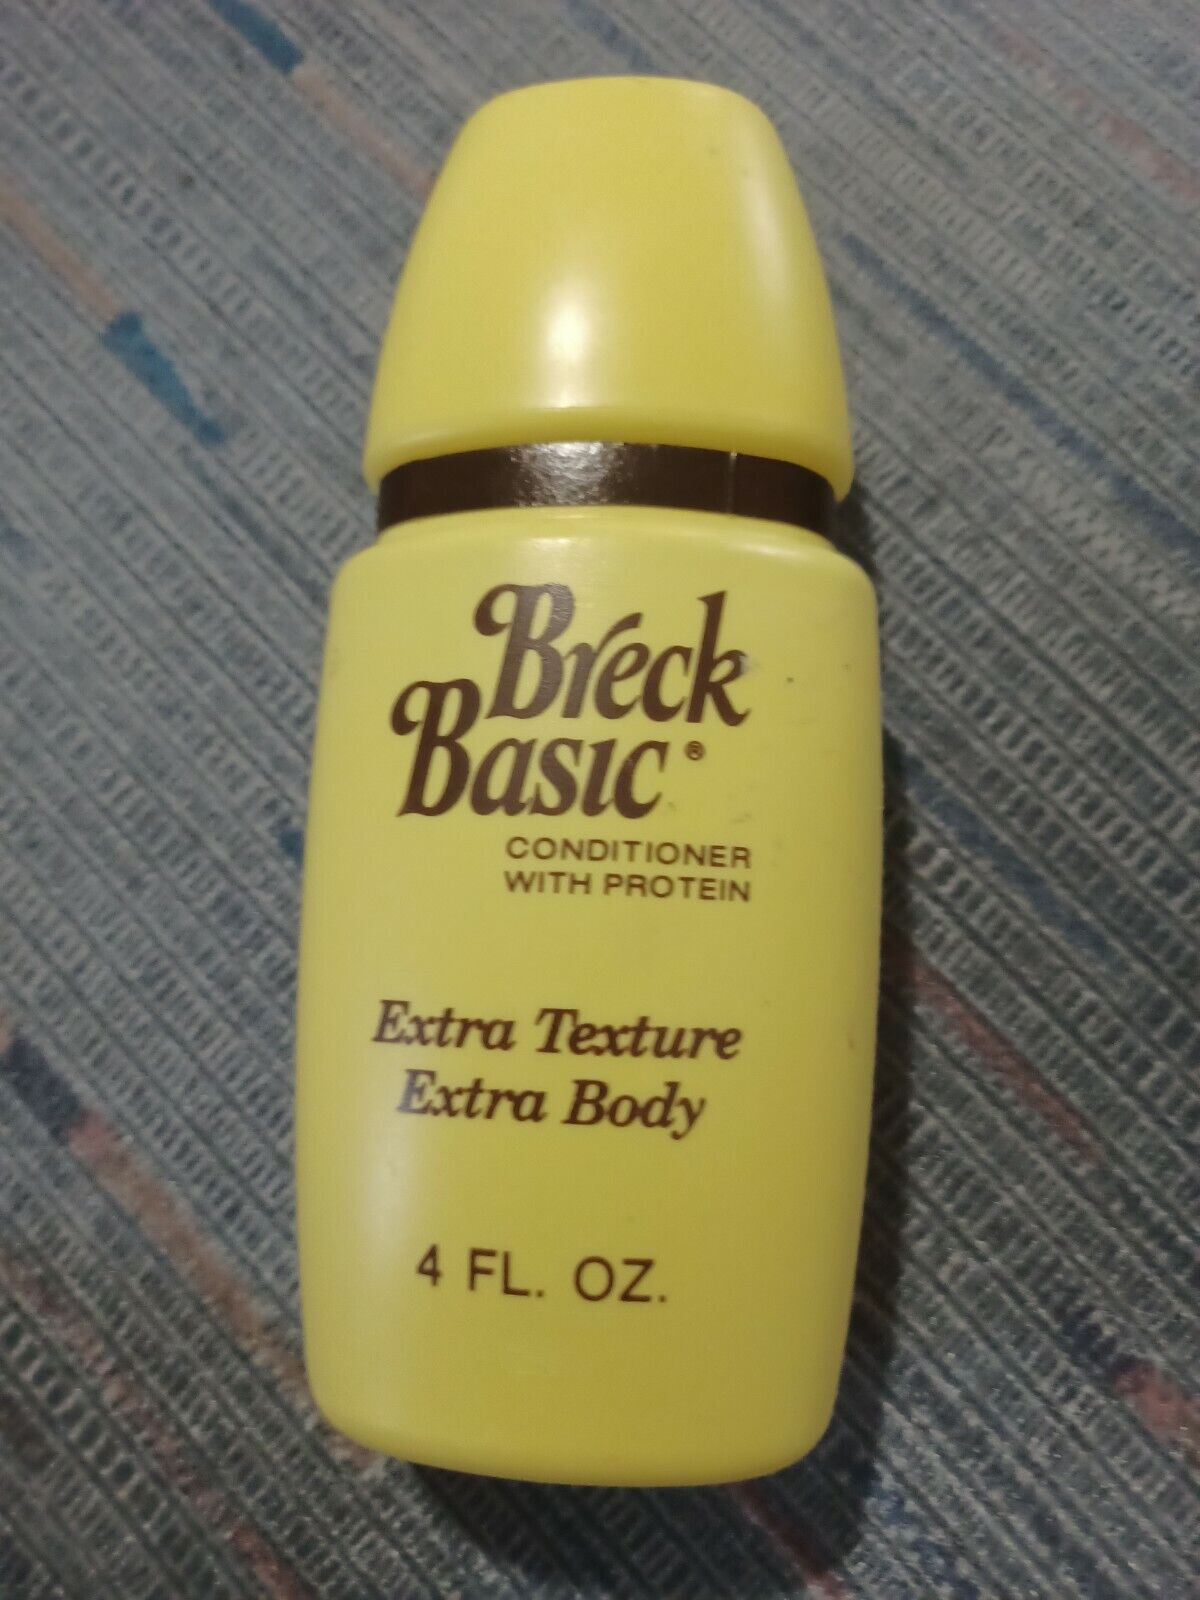 Vintage Breck Basic Conditioner with Protein probally 70\'s NOS New never opened